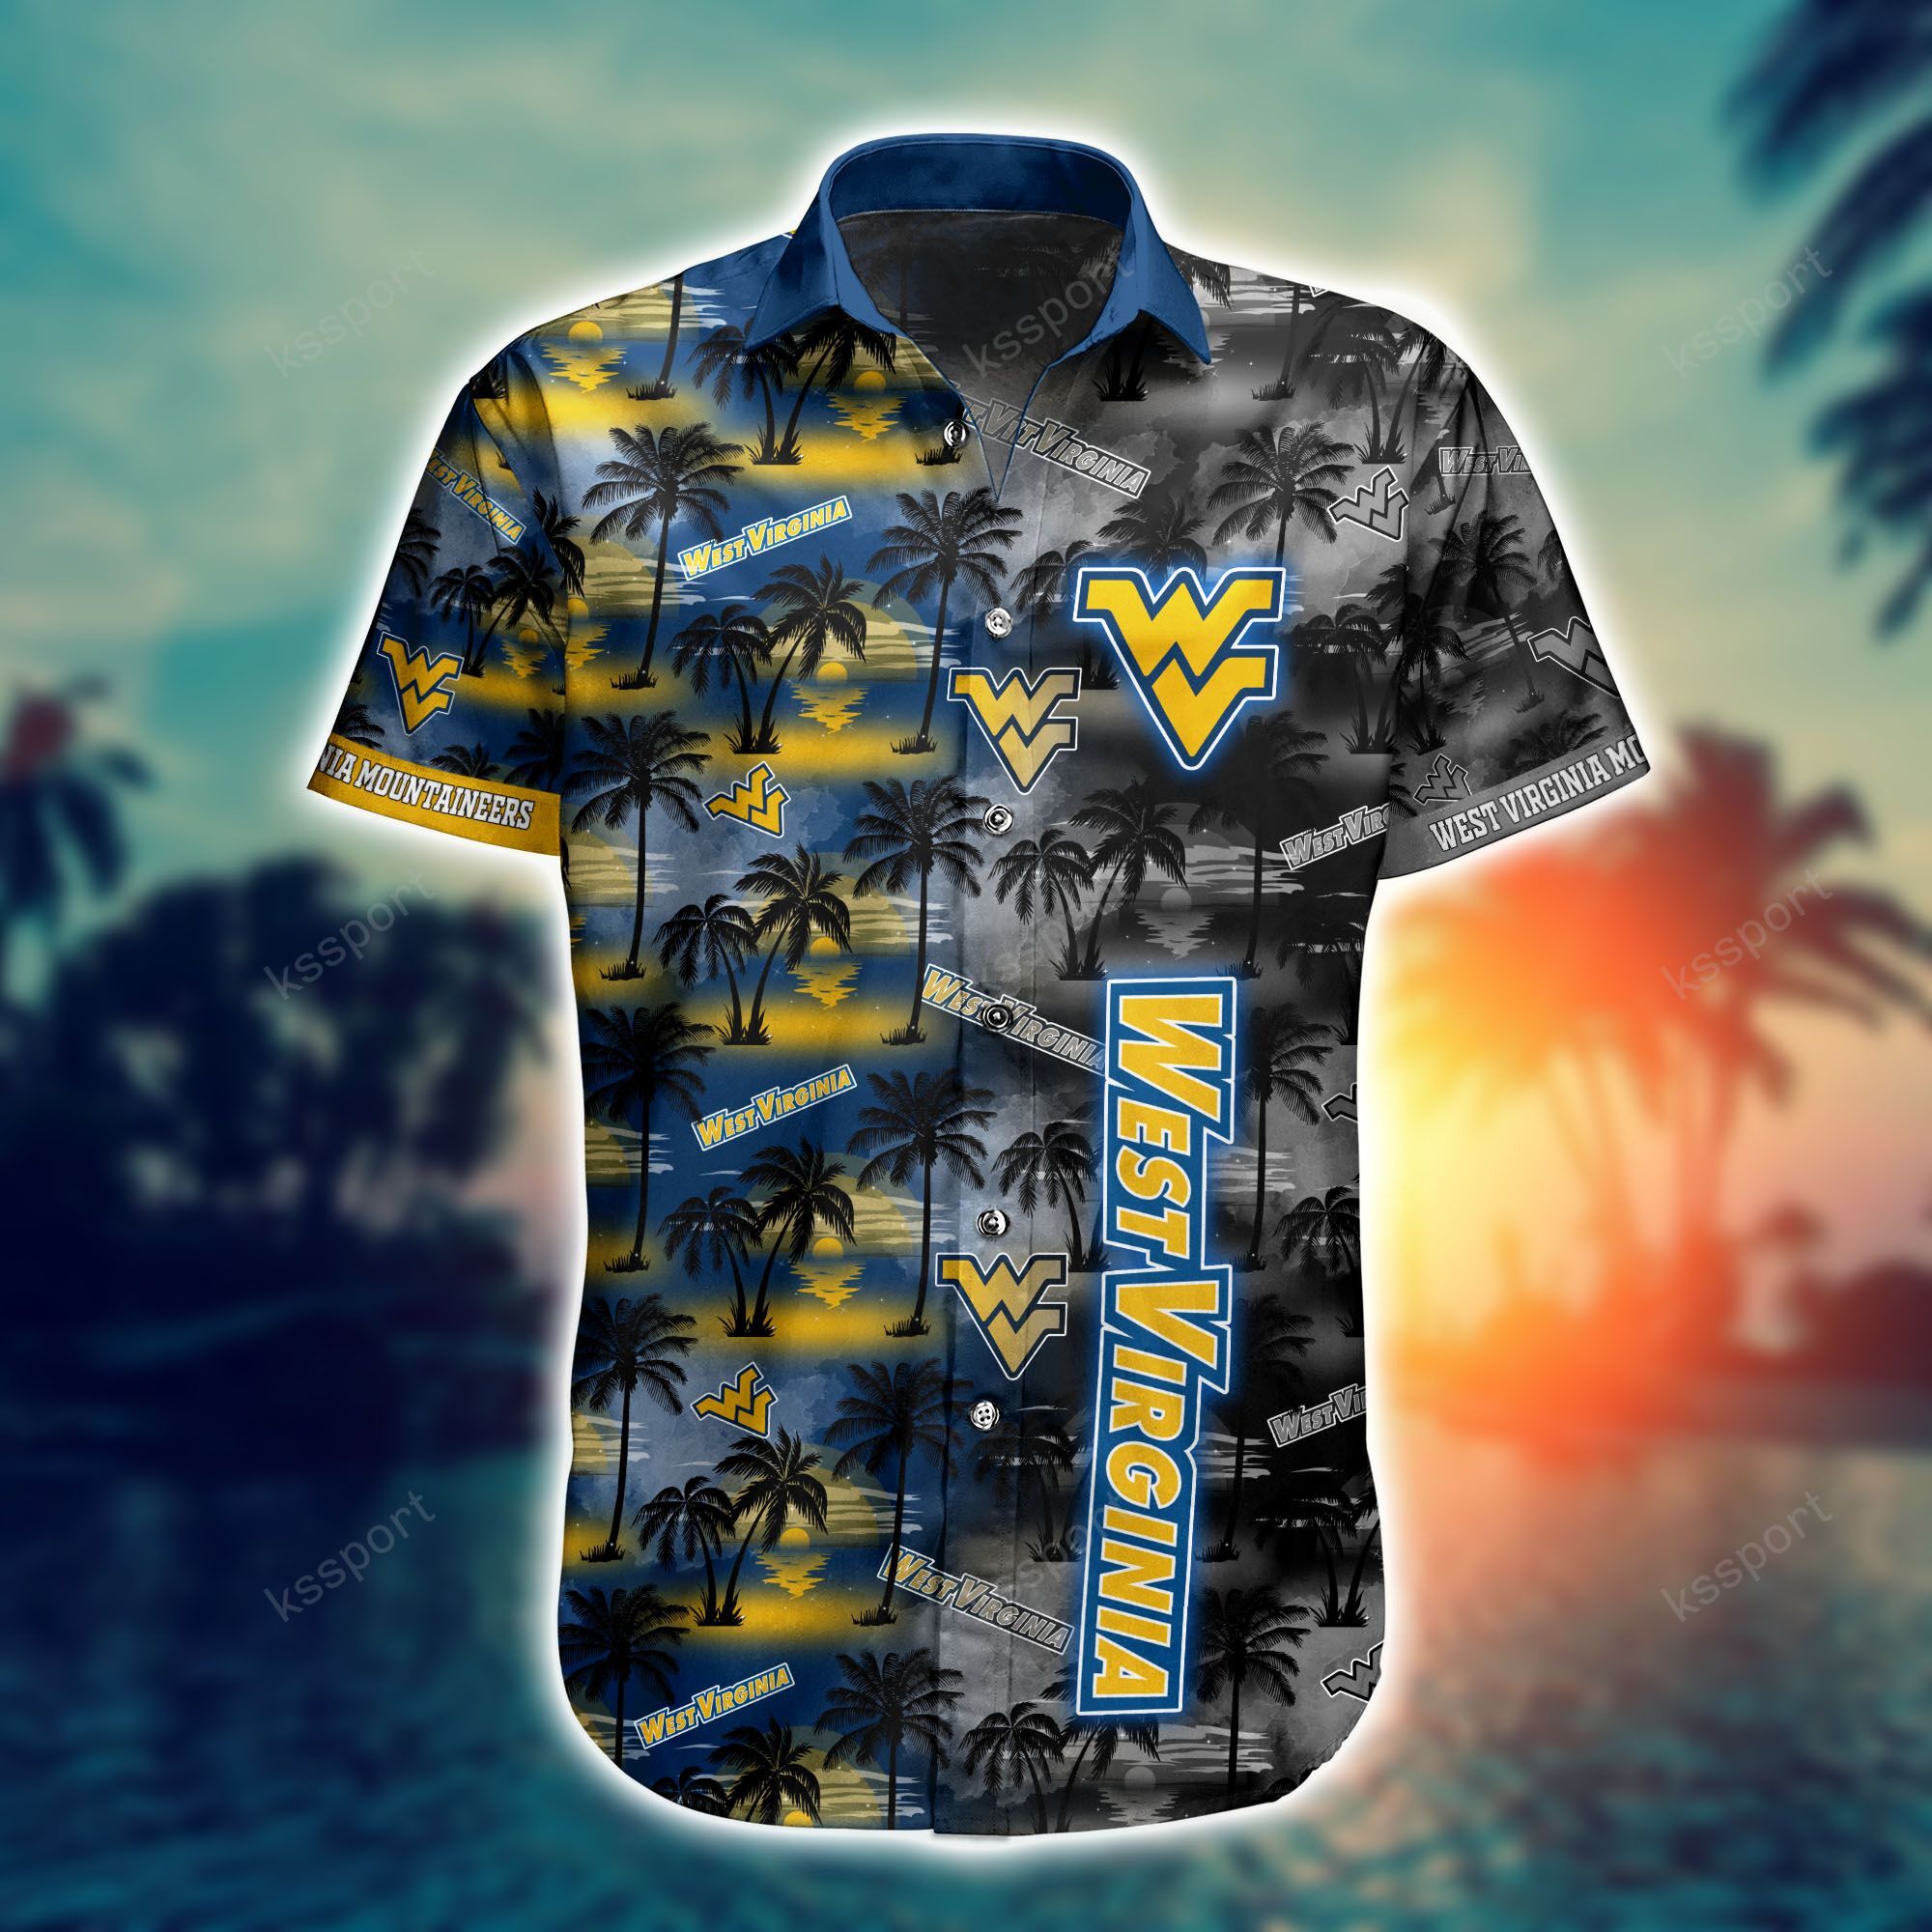 Top cool Hawaiian shirt 2022 - Make sure you get yours today before they run out! 189